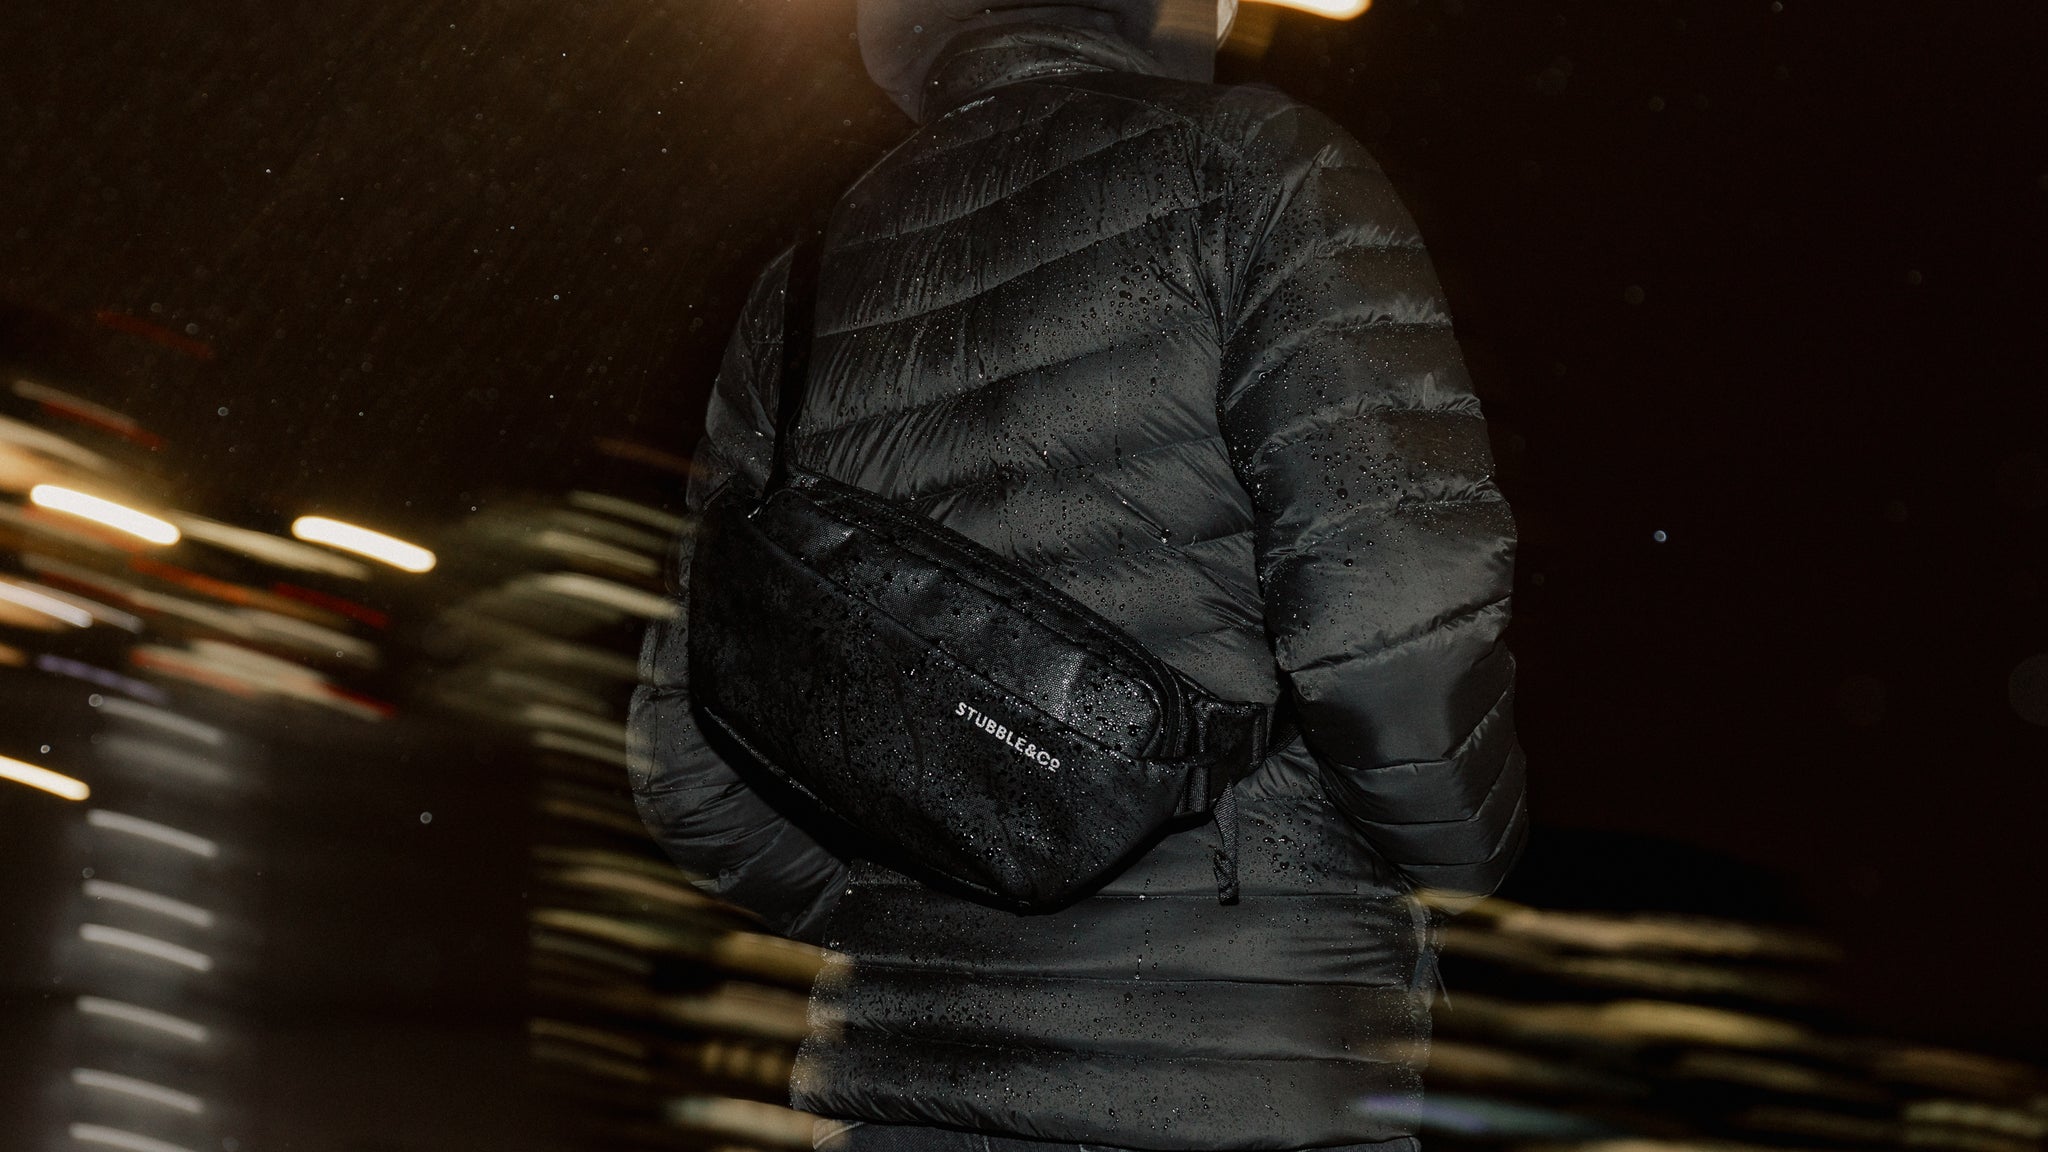 close up of the back of a person wearing a black crossbody bag at night